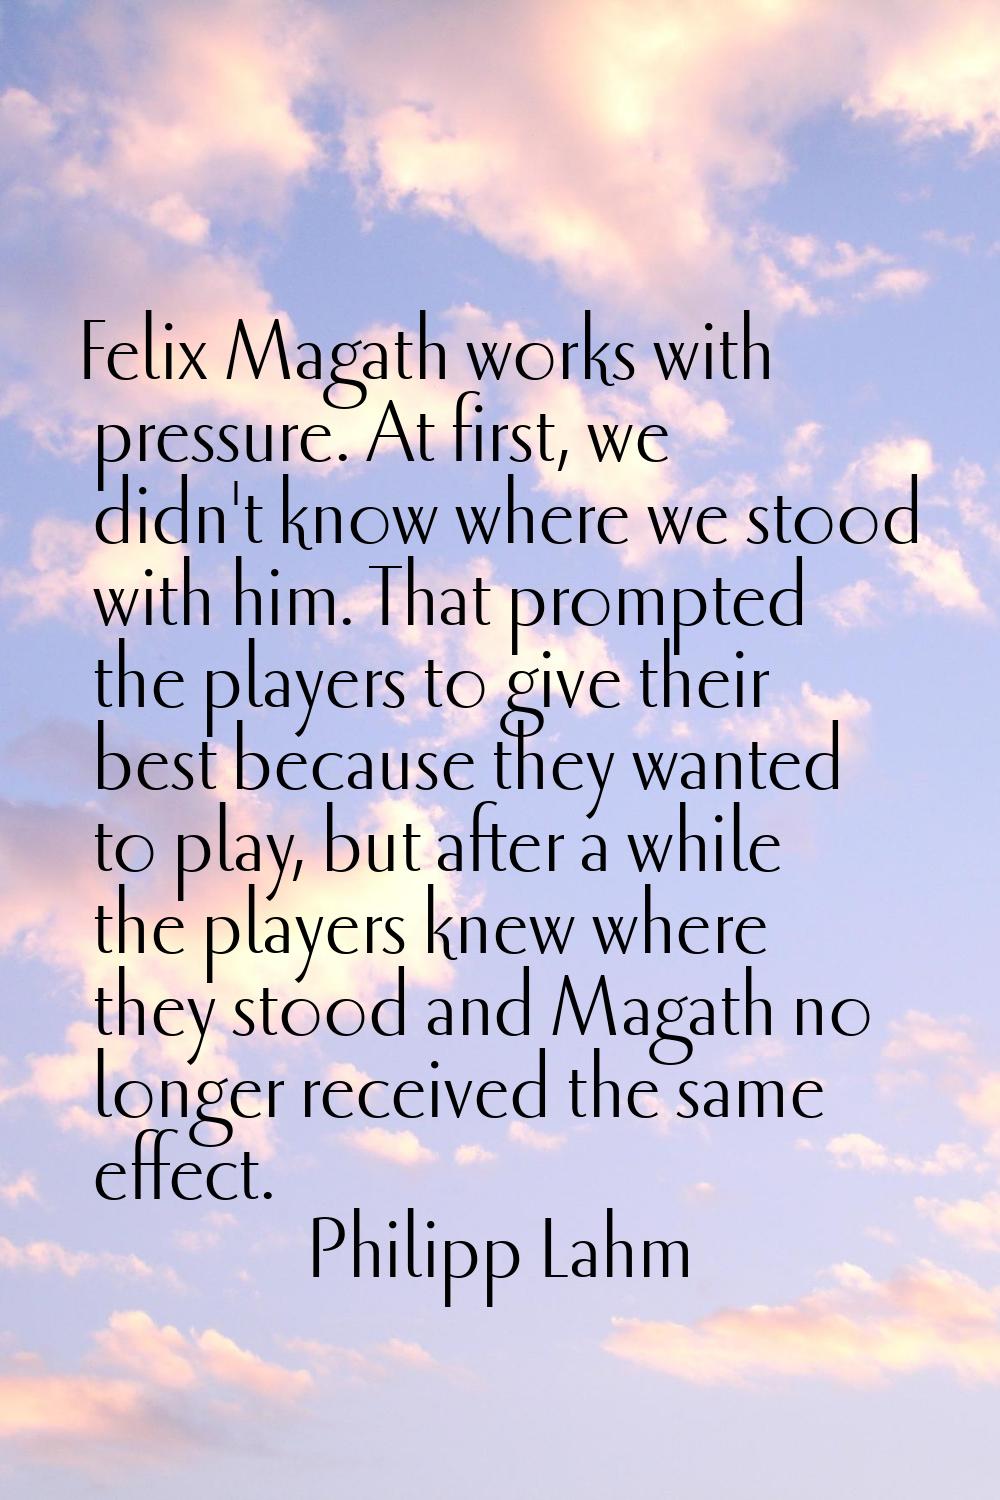 Felix Magath works with pressure. At first, we didn't know where we stood with him. That prompted t